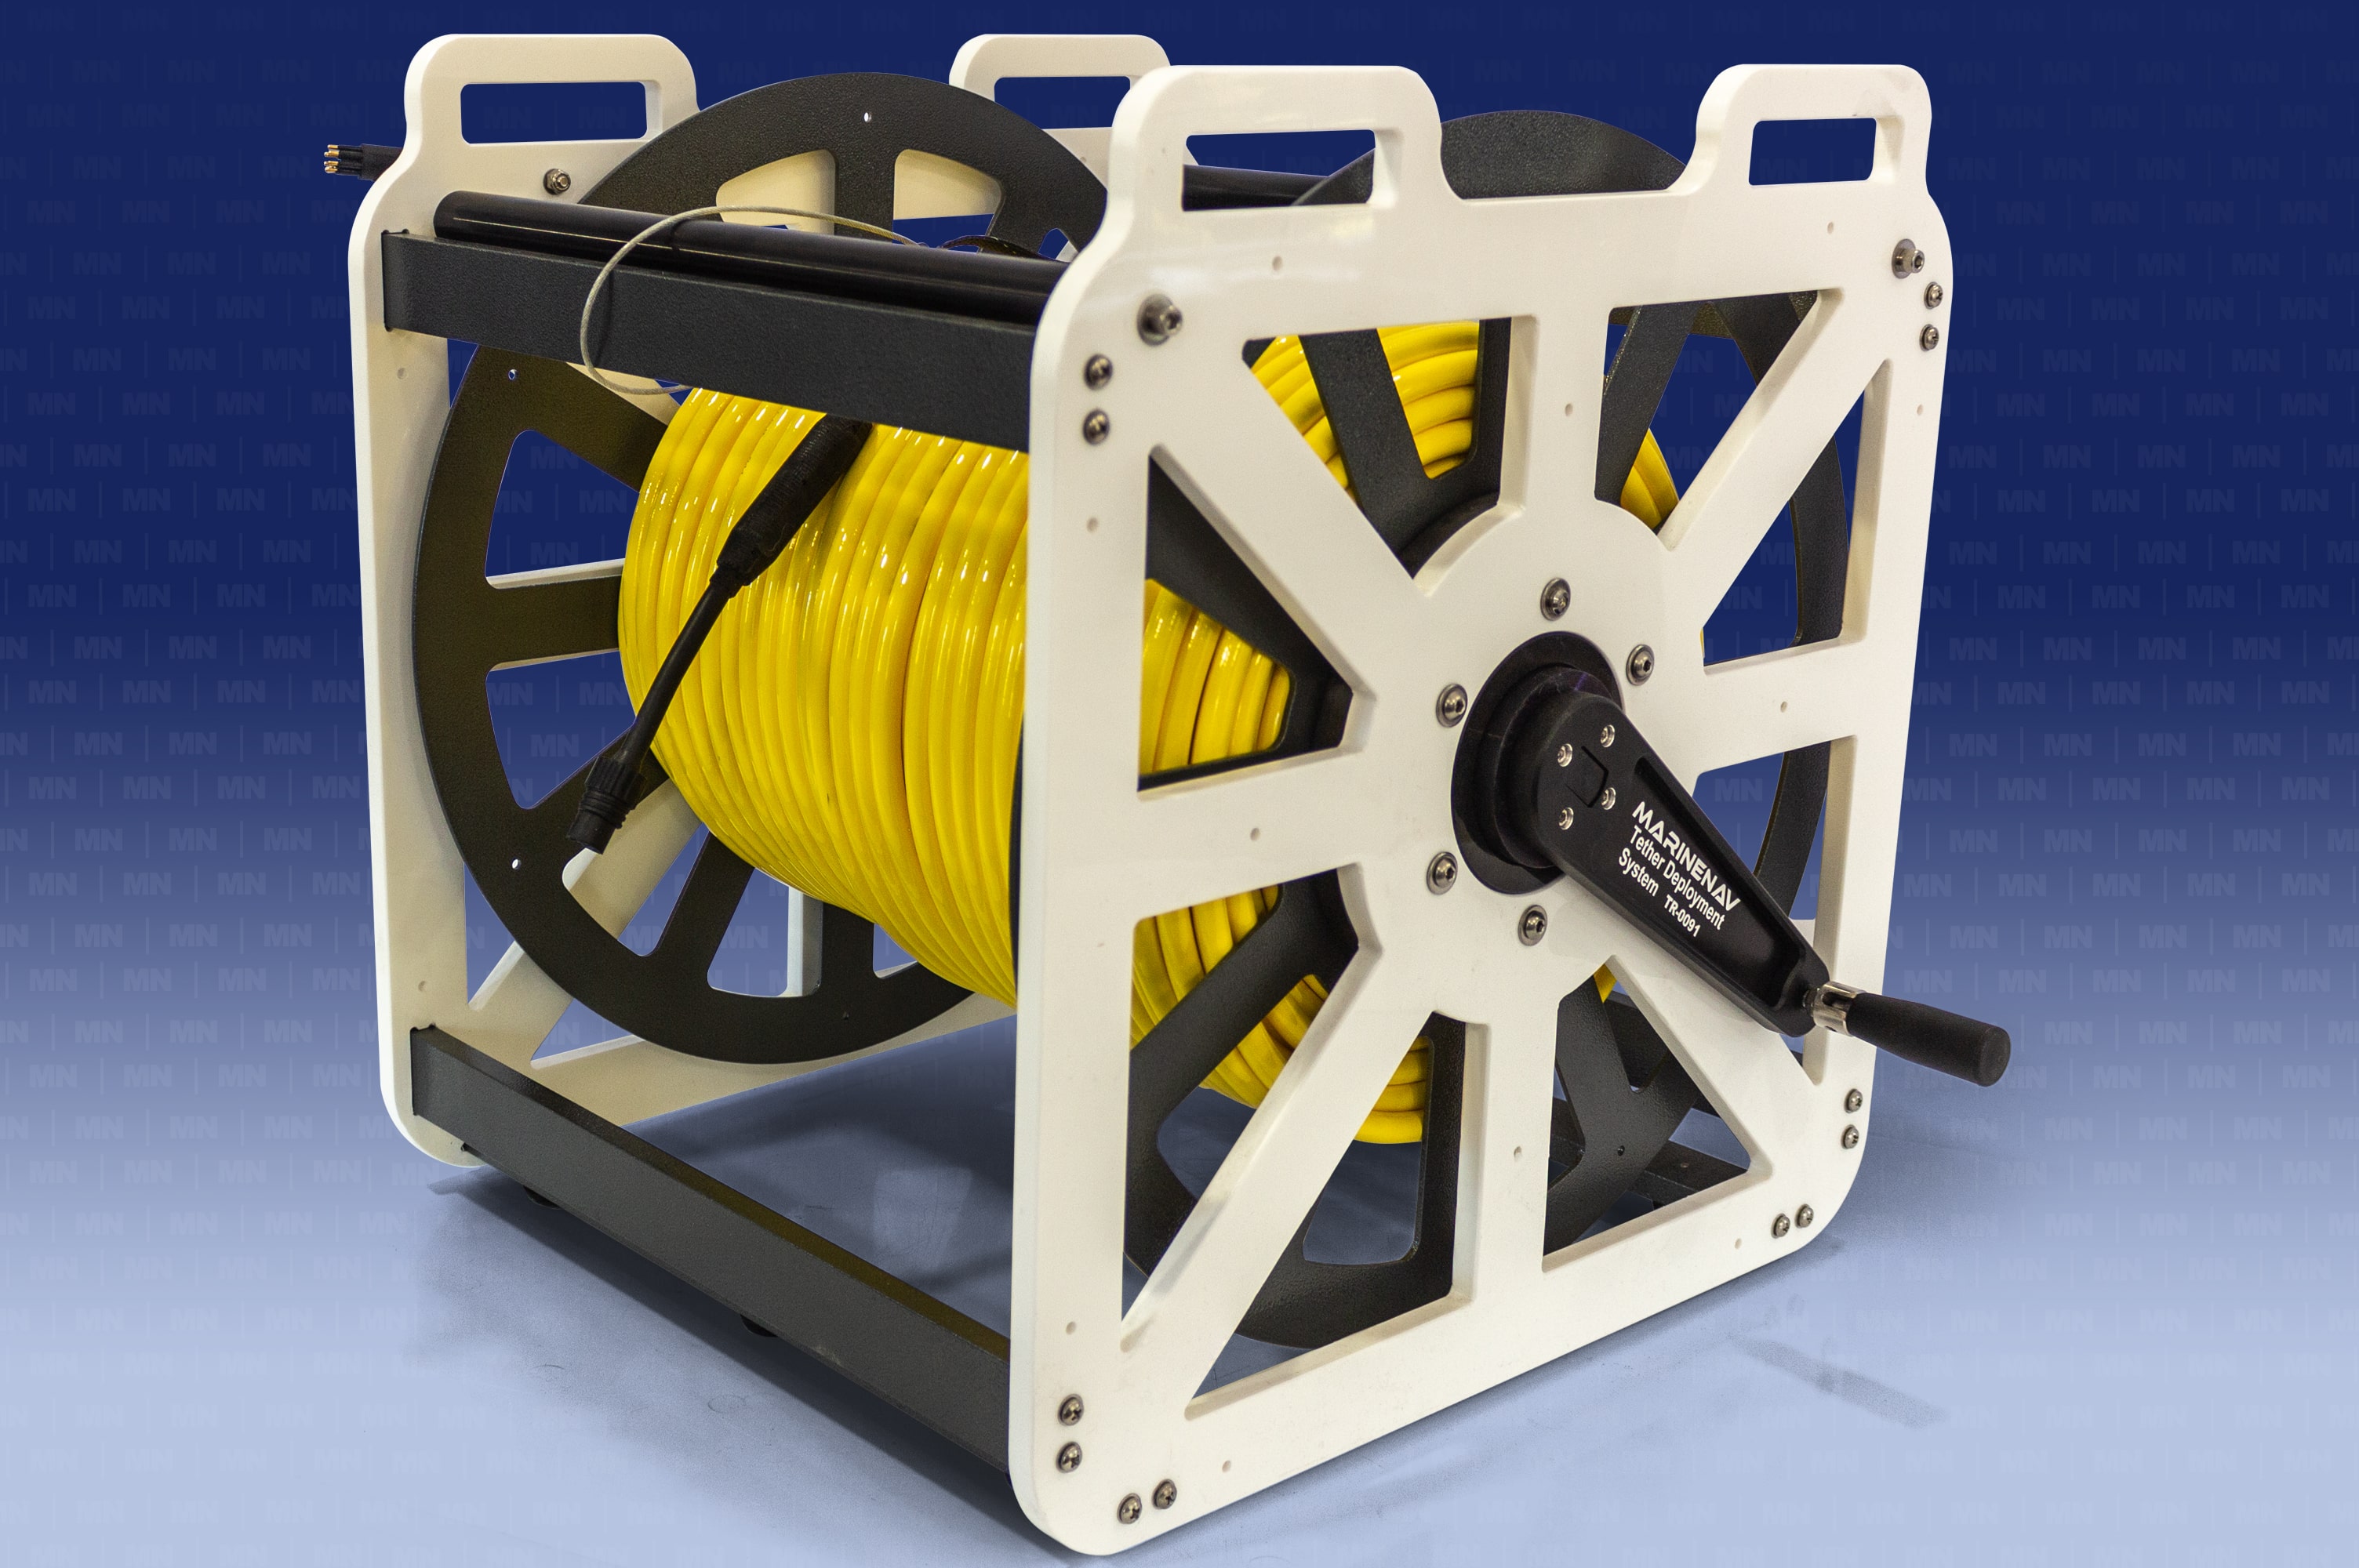 Mid-sized Tether Deployment system for larger spools of tether. A built in roller system deploys and retrieves tether minimizing risk of tangles and knotting.